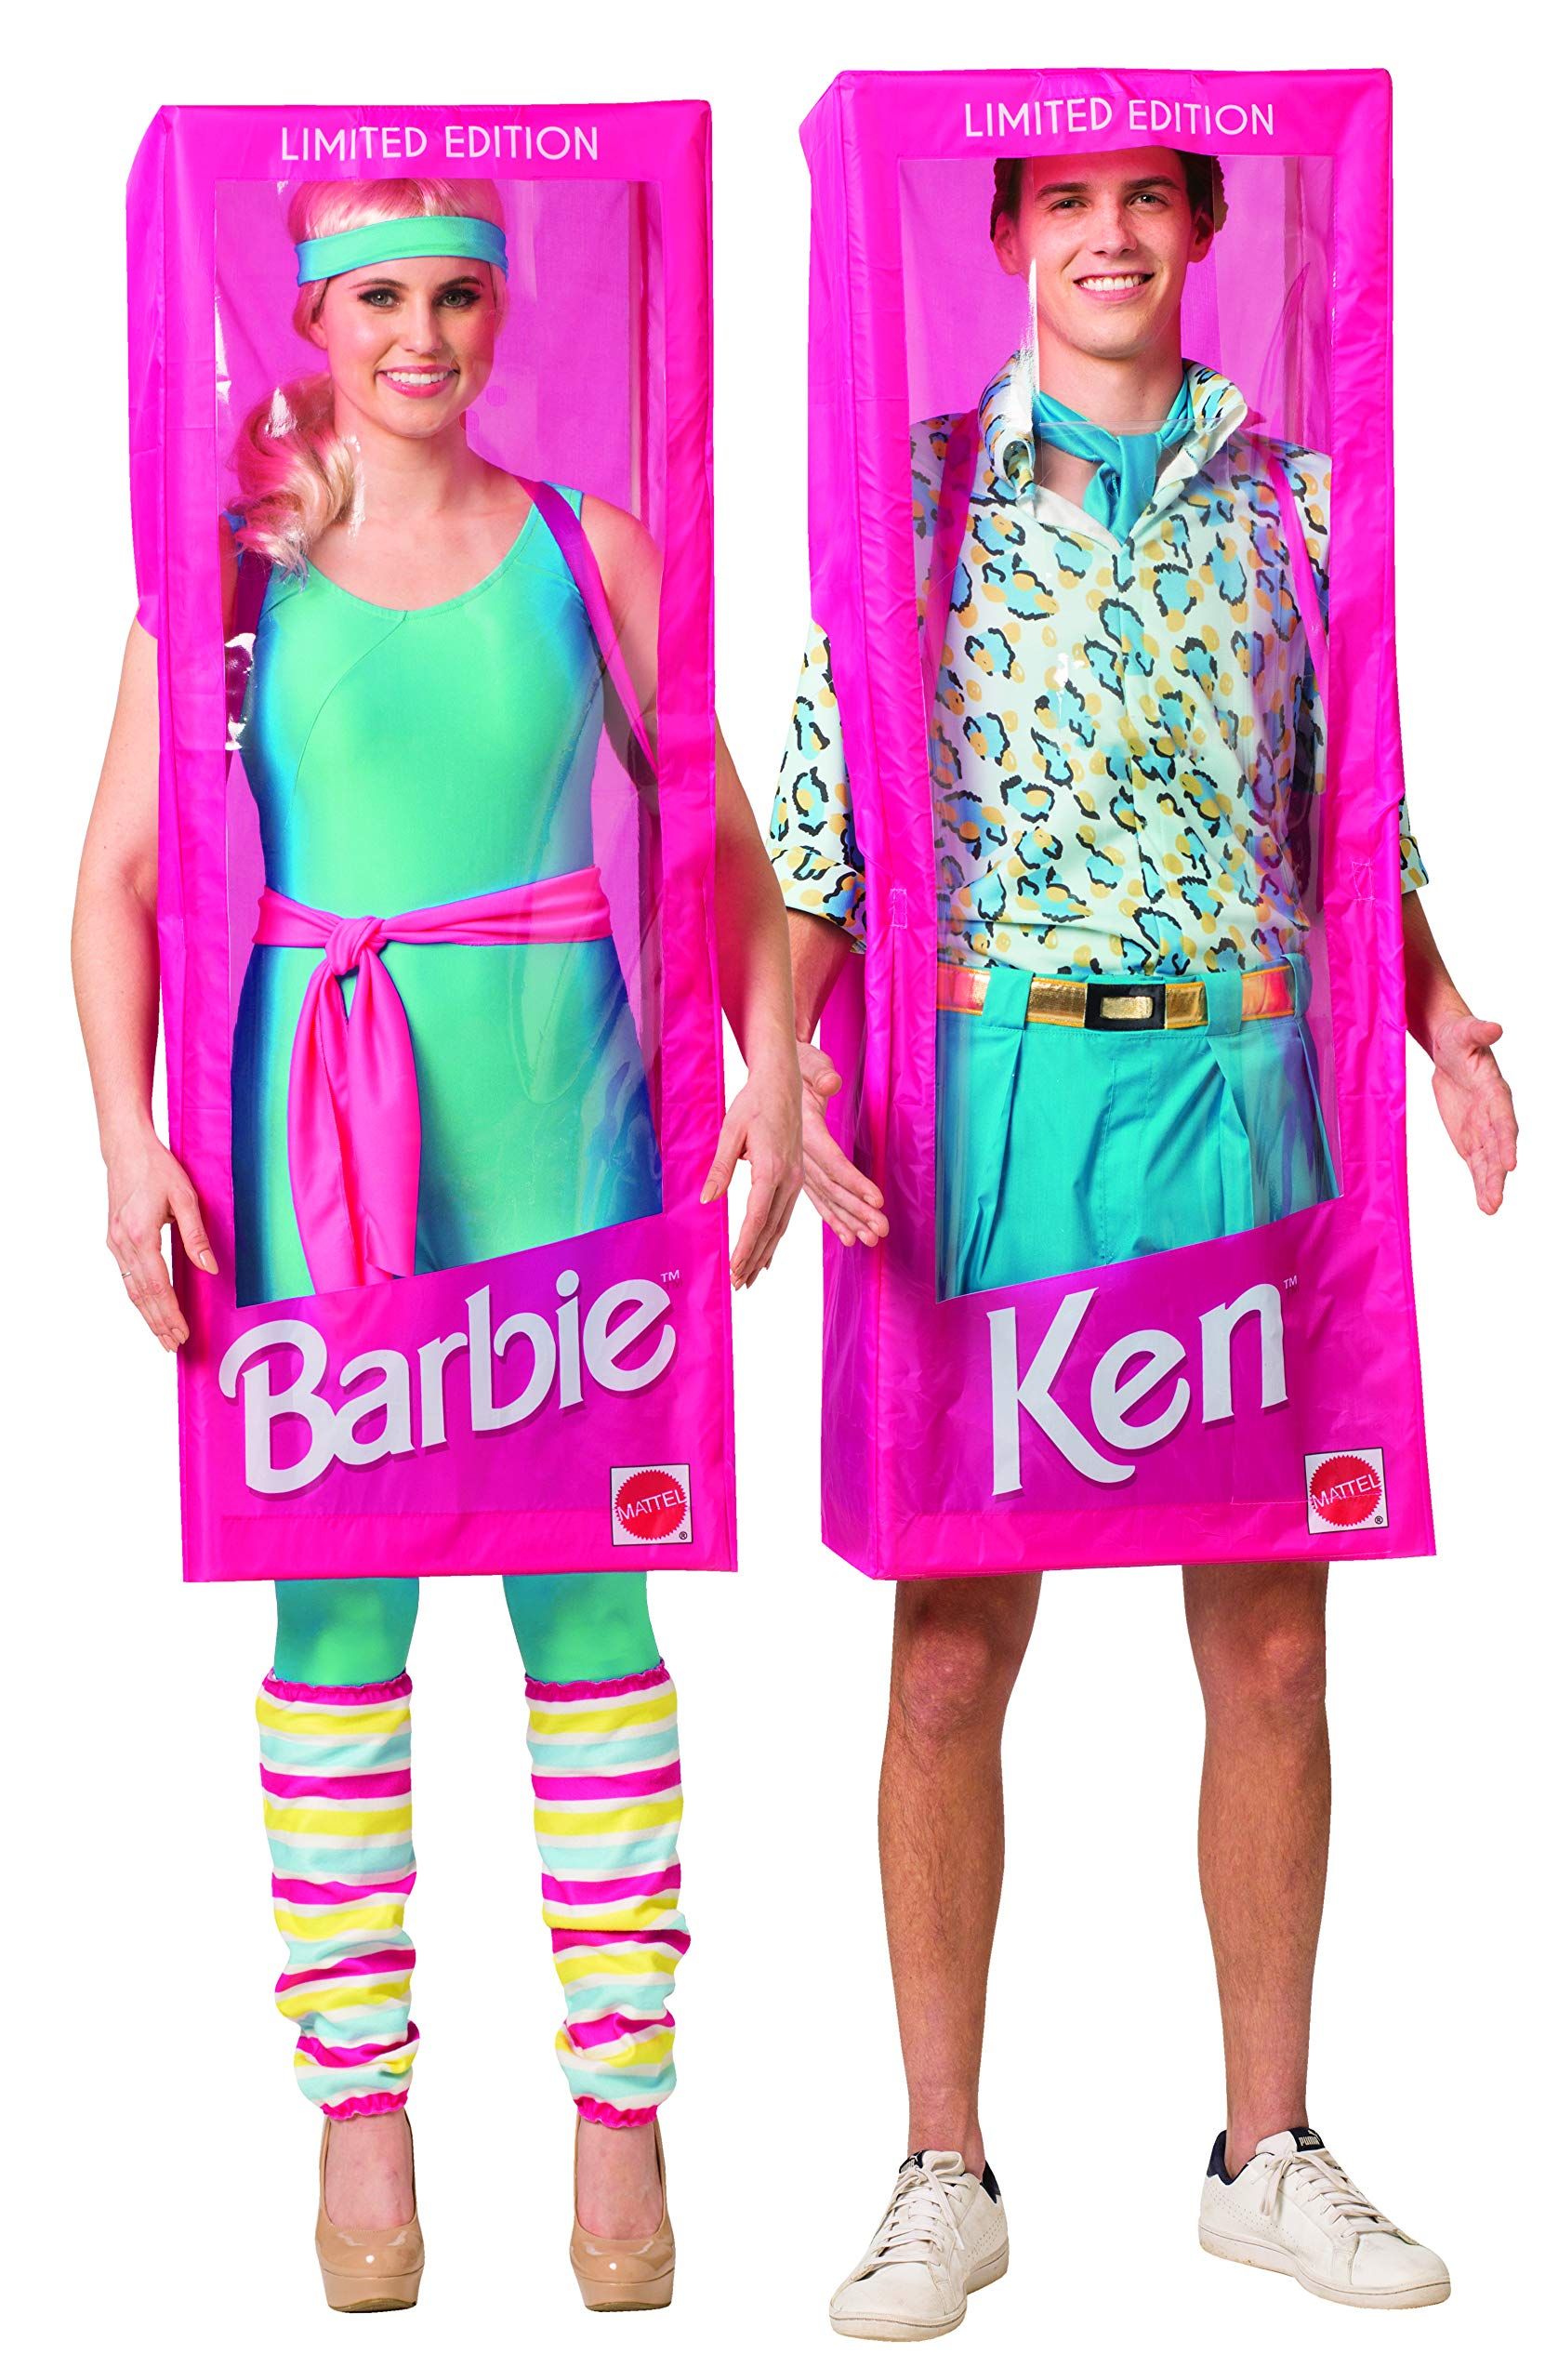 The Best Barbie Halloween Costume Ideas You Can DIY